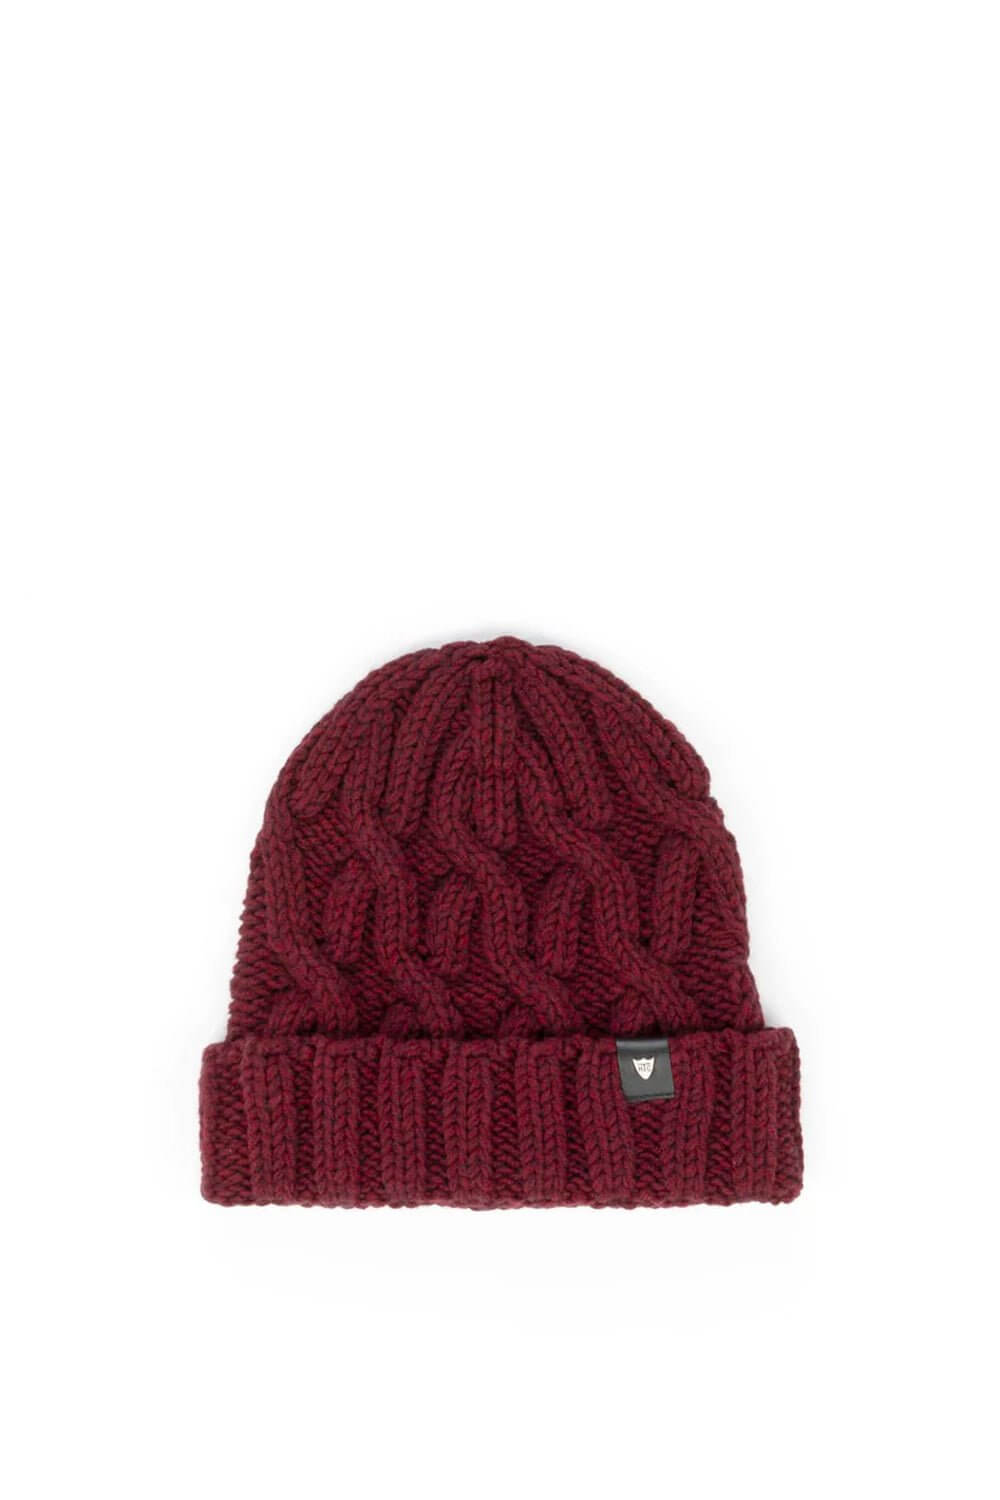 HTC BEANIE Knitted beanie with HTC leather logo detail. HTC LOS ANGELES